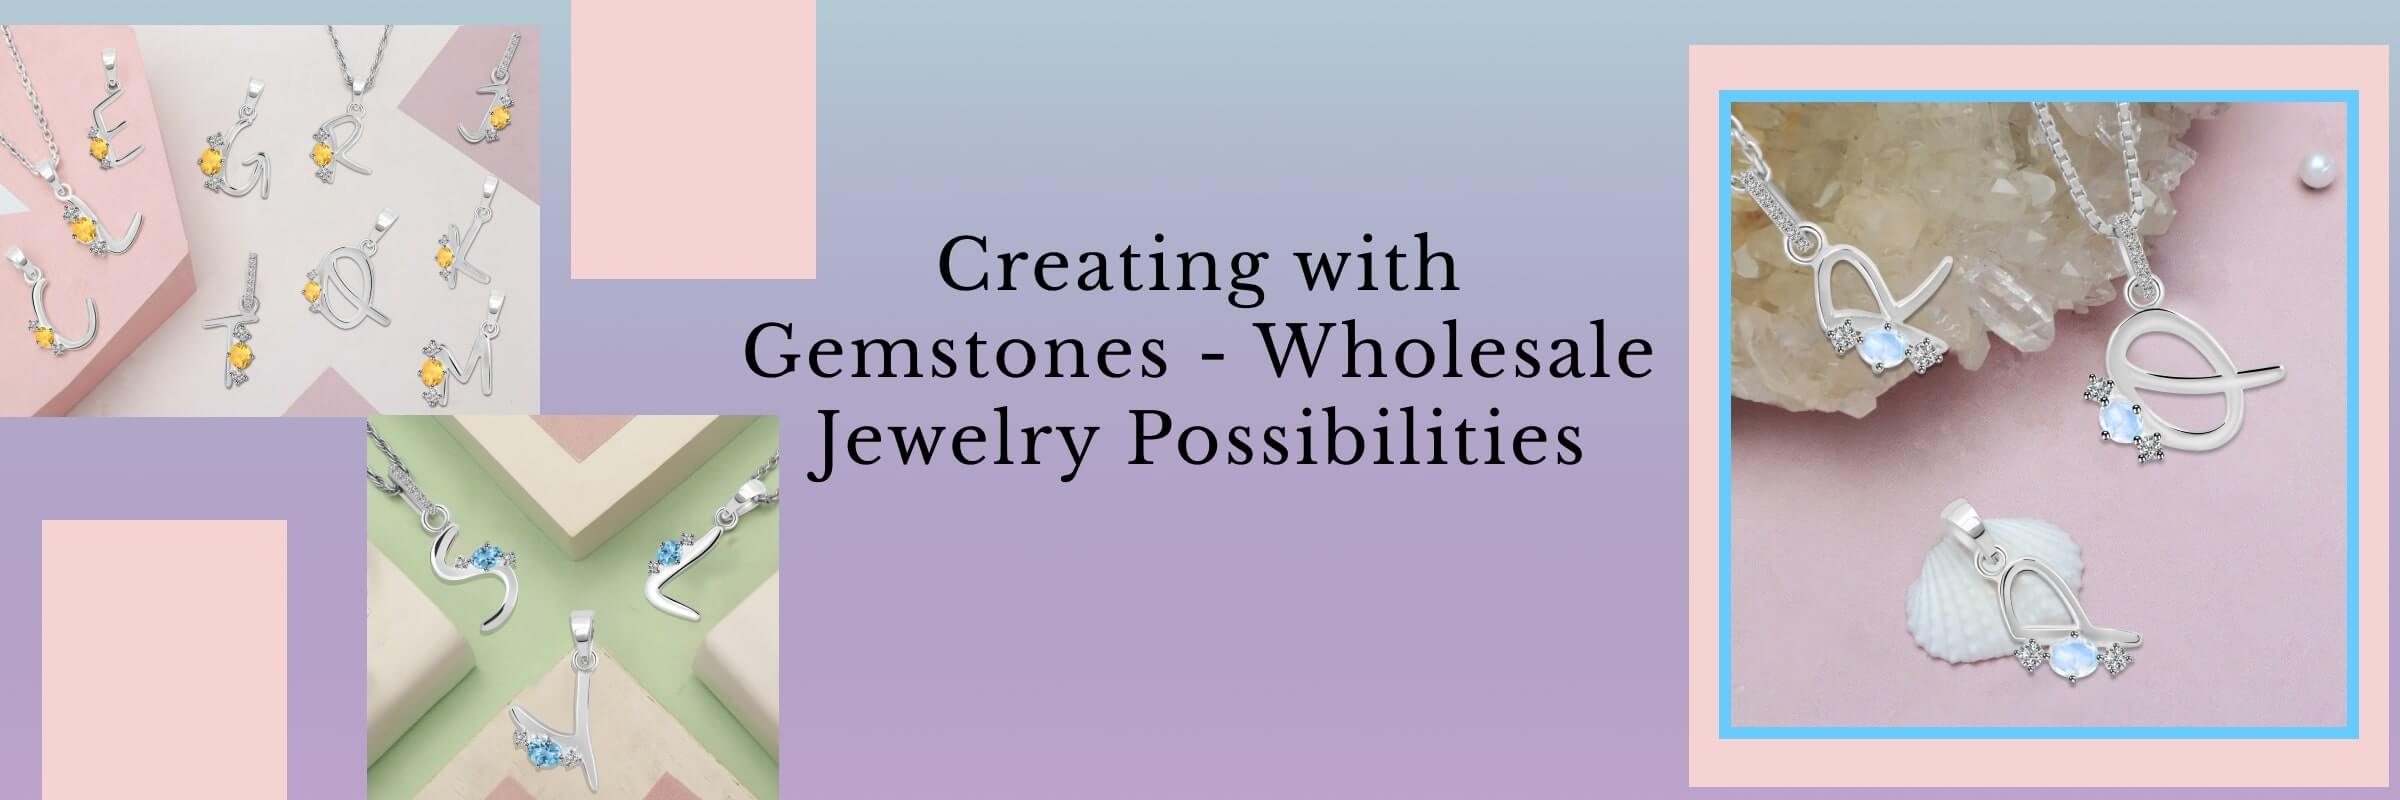 Wholesale Gemstone Jewelry Manufacturers and Suppliers: A Backbone of Possibilities